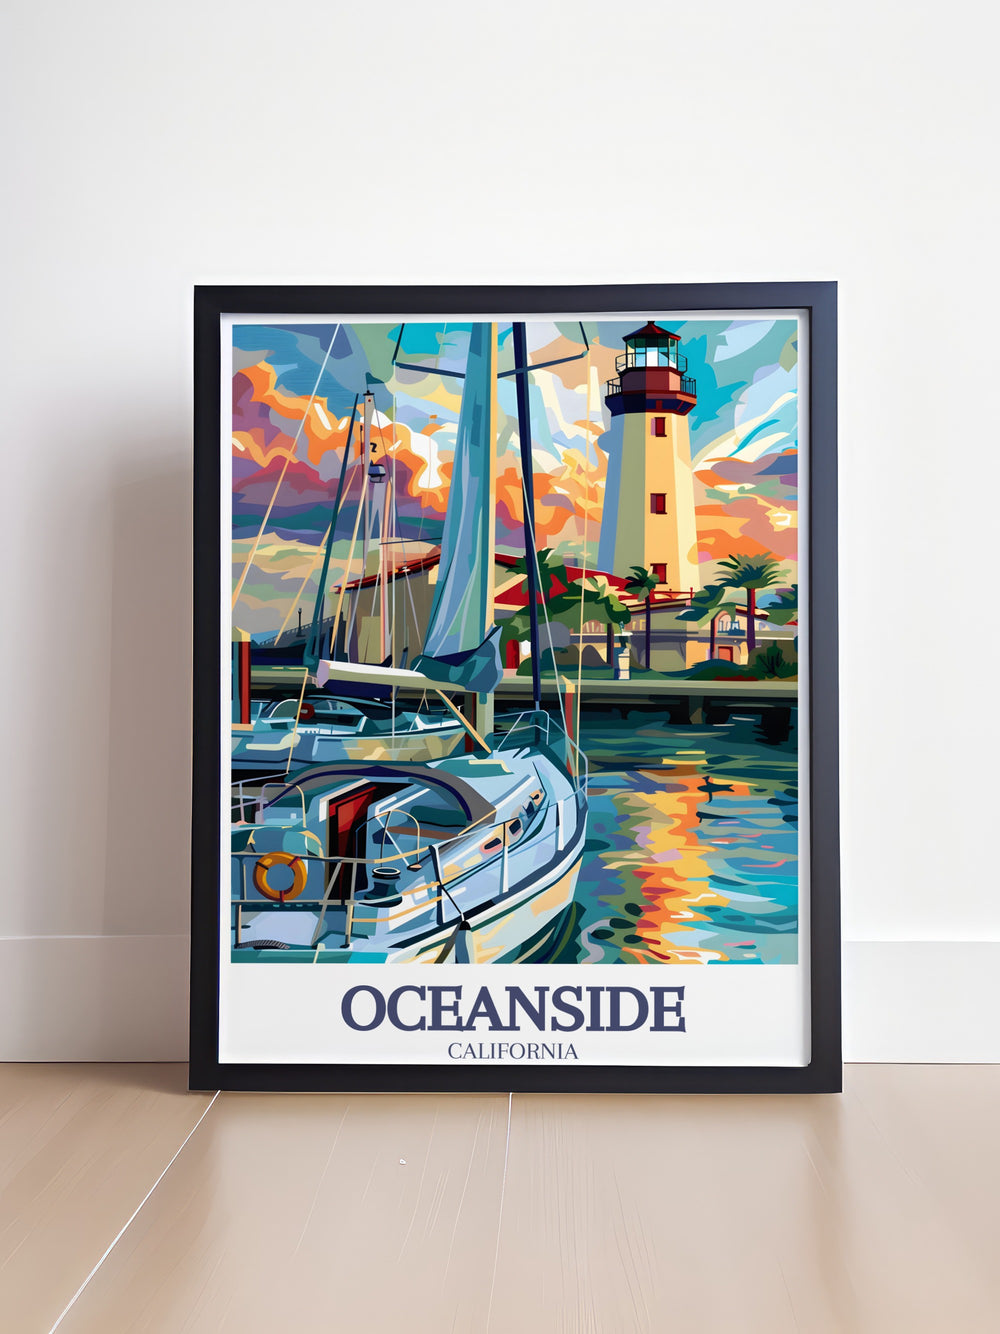 Oceanside Harbor Lighthouse poster featuring the iconic lighthouse against a tranquil harbor backdrop ideal for adding a touch of California charm to your walls and making a thoughtful gift for California lovers